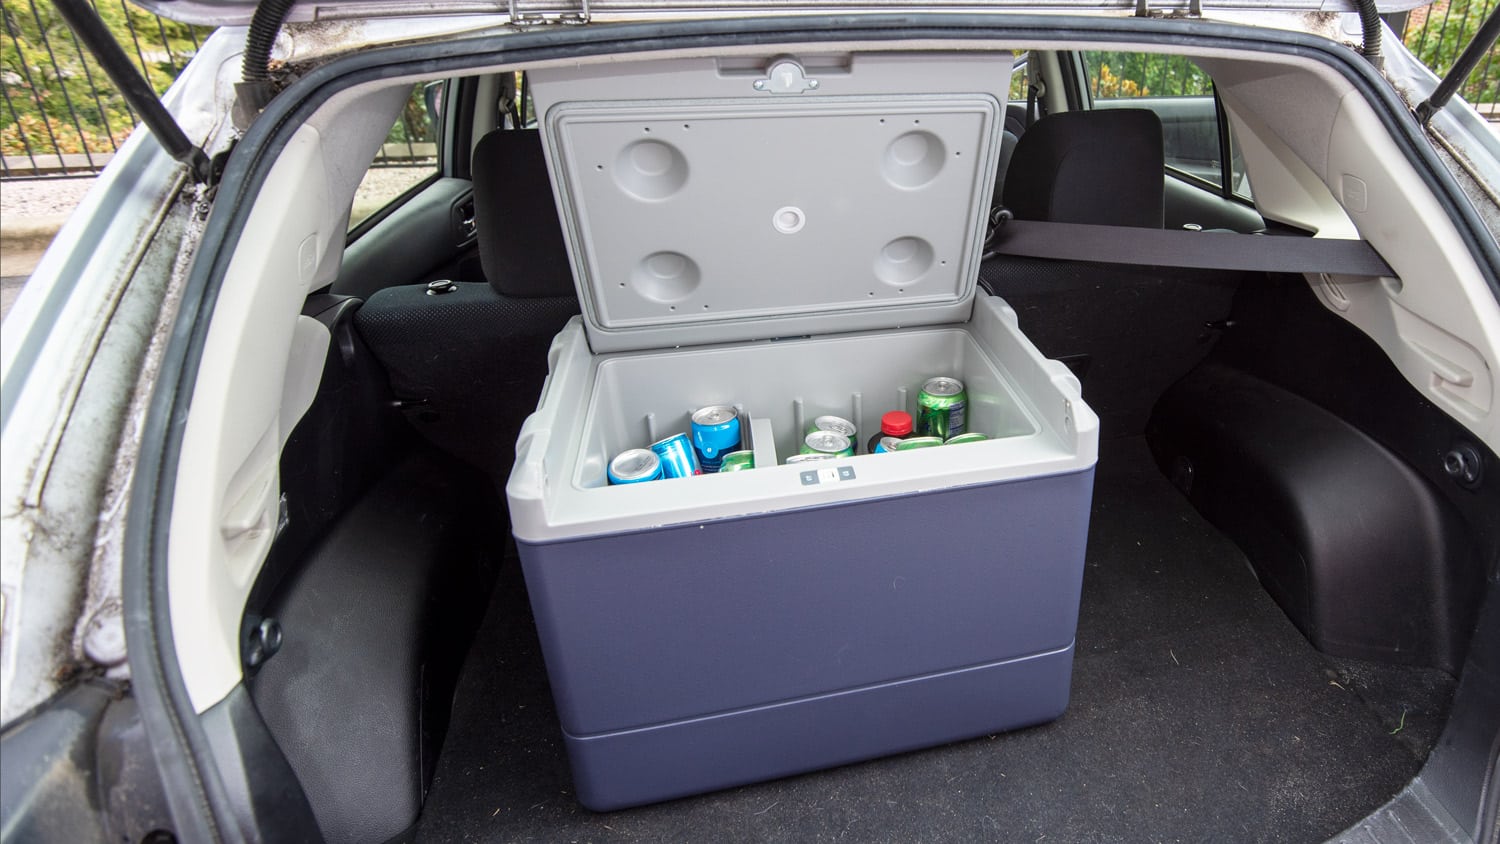 In the open back of a vehicle, a Coleman Powerchill holds an assortment of beverage cans